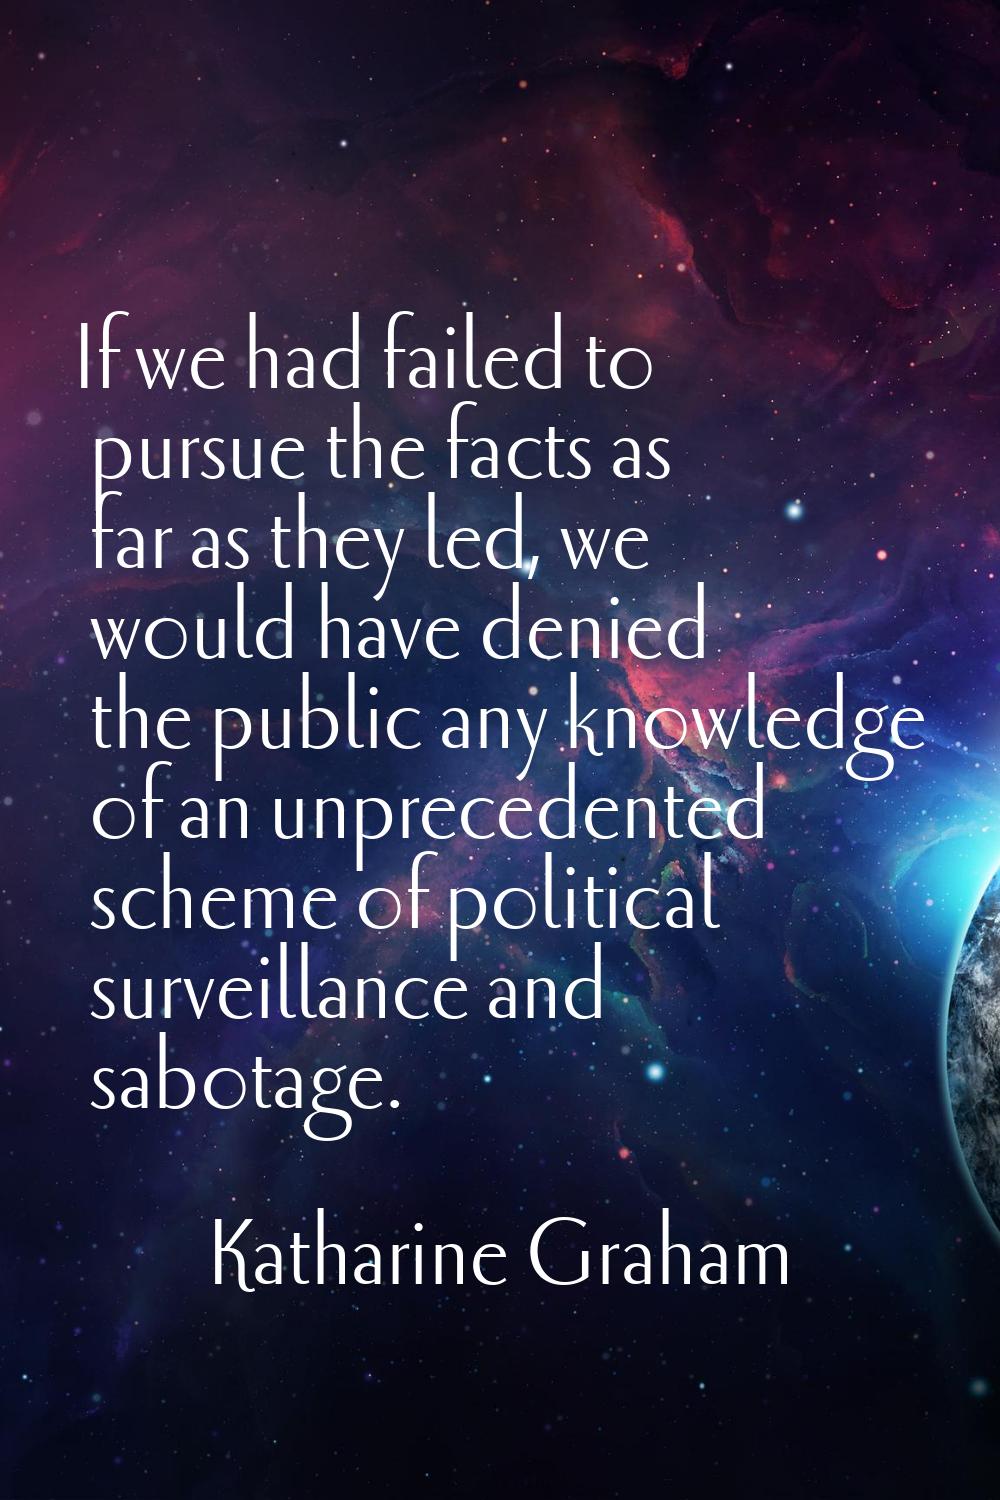 If we had failed to pursue the facts as far as they led, we would have denied the public any knowle